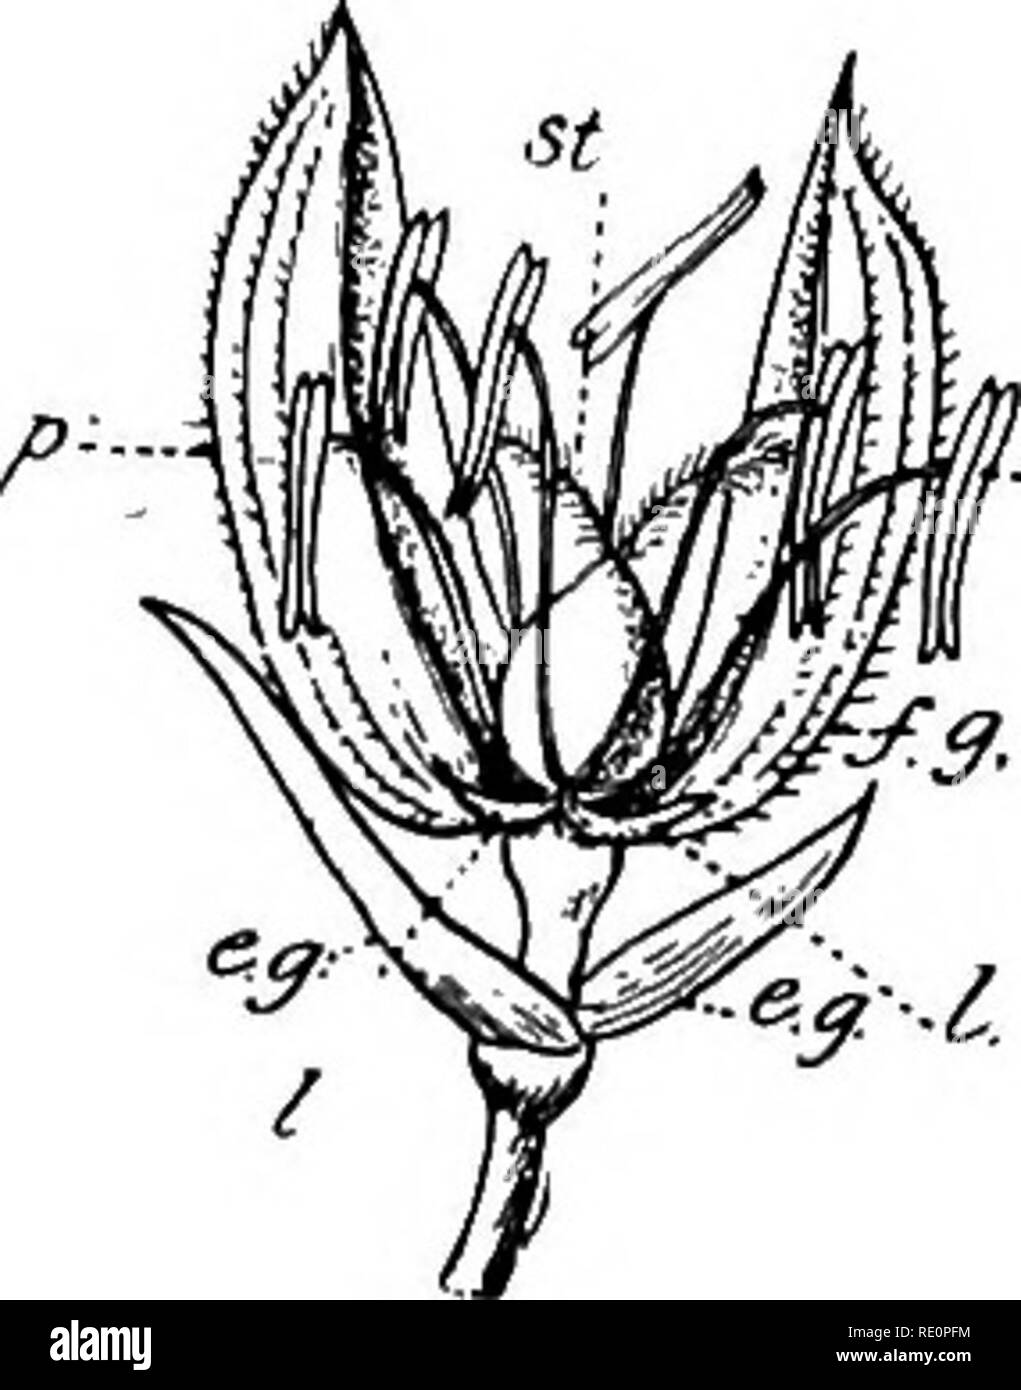 . A manual of Indian botany. Botany. 302 CLASSIFICATION. Fig. 271.—One-flowered Spikelet of Dhan or Rice e.g-.. Pair of empty glutnes. p, Palea. f.g:. Flowerings glume. s, Stamens. /, Lodicules. s£t Stigma. panicle. The spikelets (fig. 270) are usually enclosed at the base by two empty bracts named glumes (outer or empty, glumes) (e.g.), one placed a little above the other; these glumes are succeeded by one or more glumes (flowering glumes) {f.g-), arranged distichously on the short rachis, and each of these embraces a single flower (although one or more of them are occasionally empty). Within Stock Photo